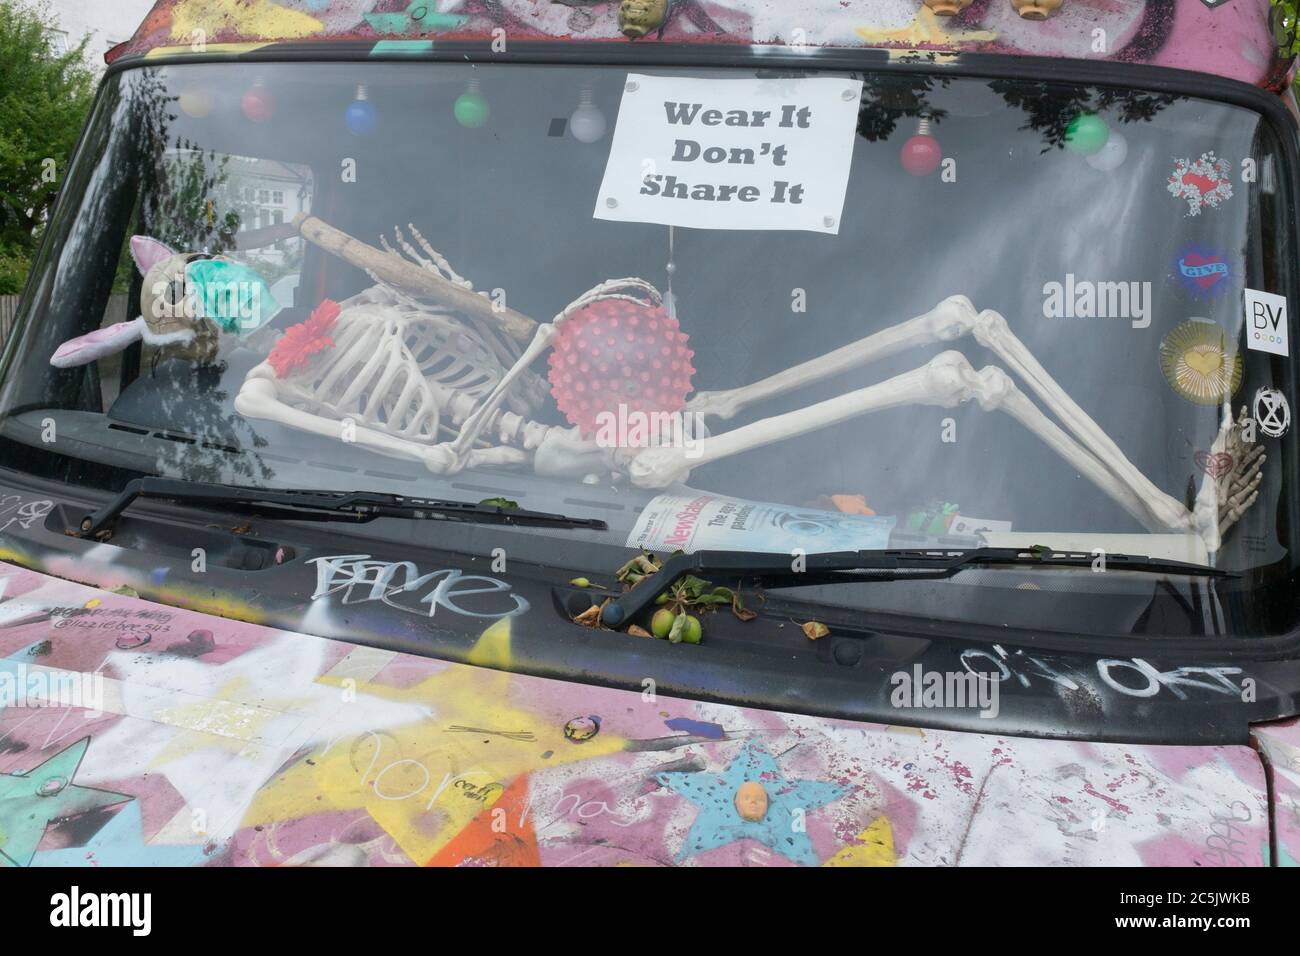 As the Coronavirus lockdown continues to ease, a further 155 UK Covid deaths are reported in the last 24 hrs, a total now of 43,730. A skeleton wearing a surgical face mask lies across the windscreen of a van in Herne Hill, on 30th June 2020, in London, England. Stock Photo